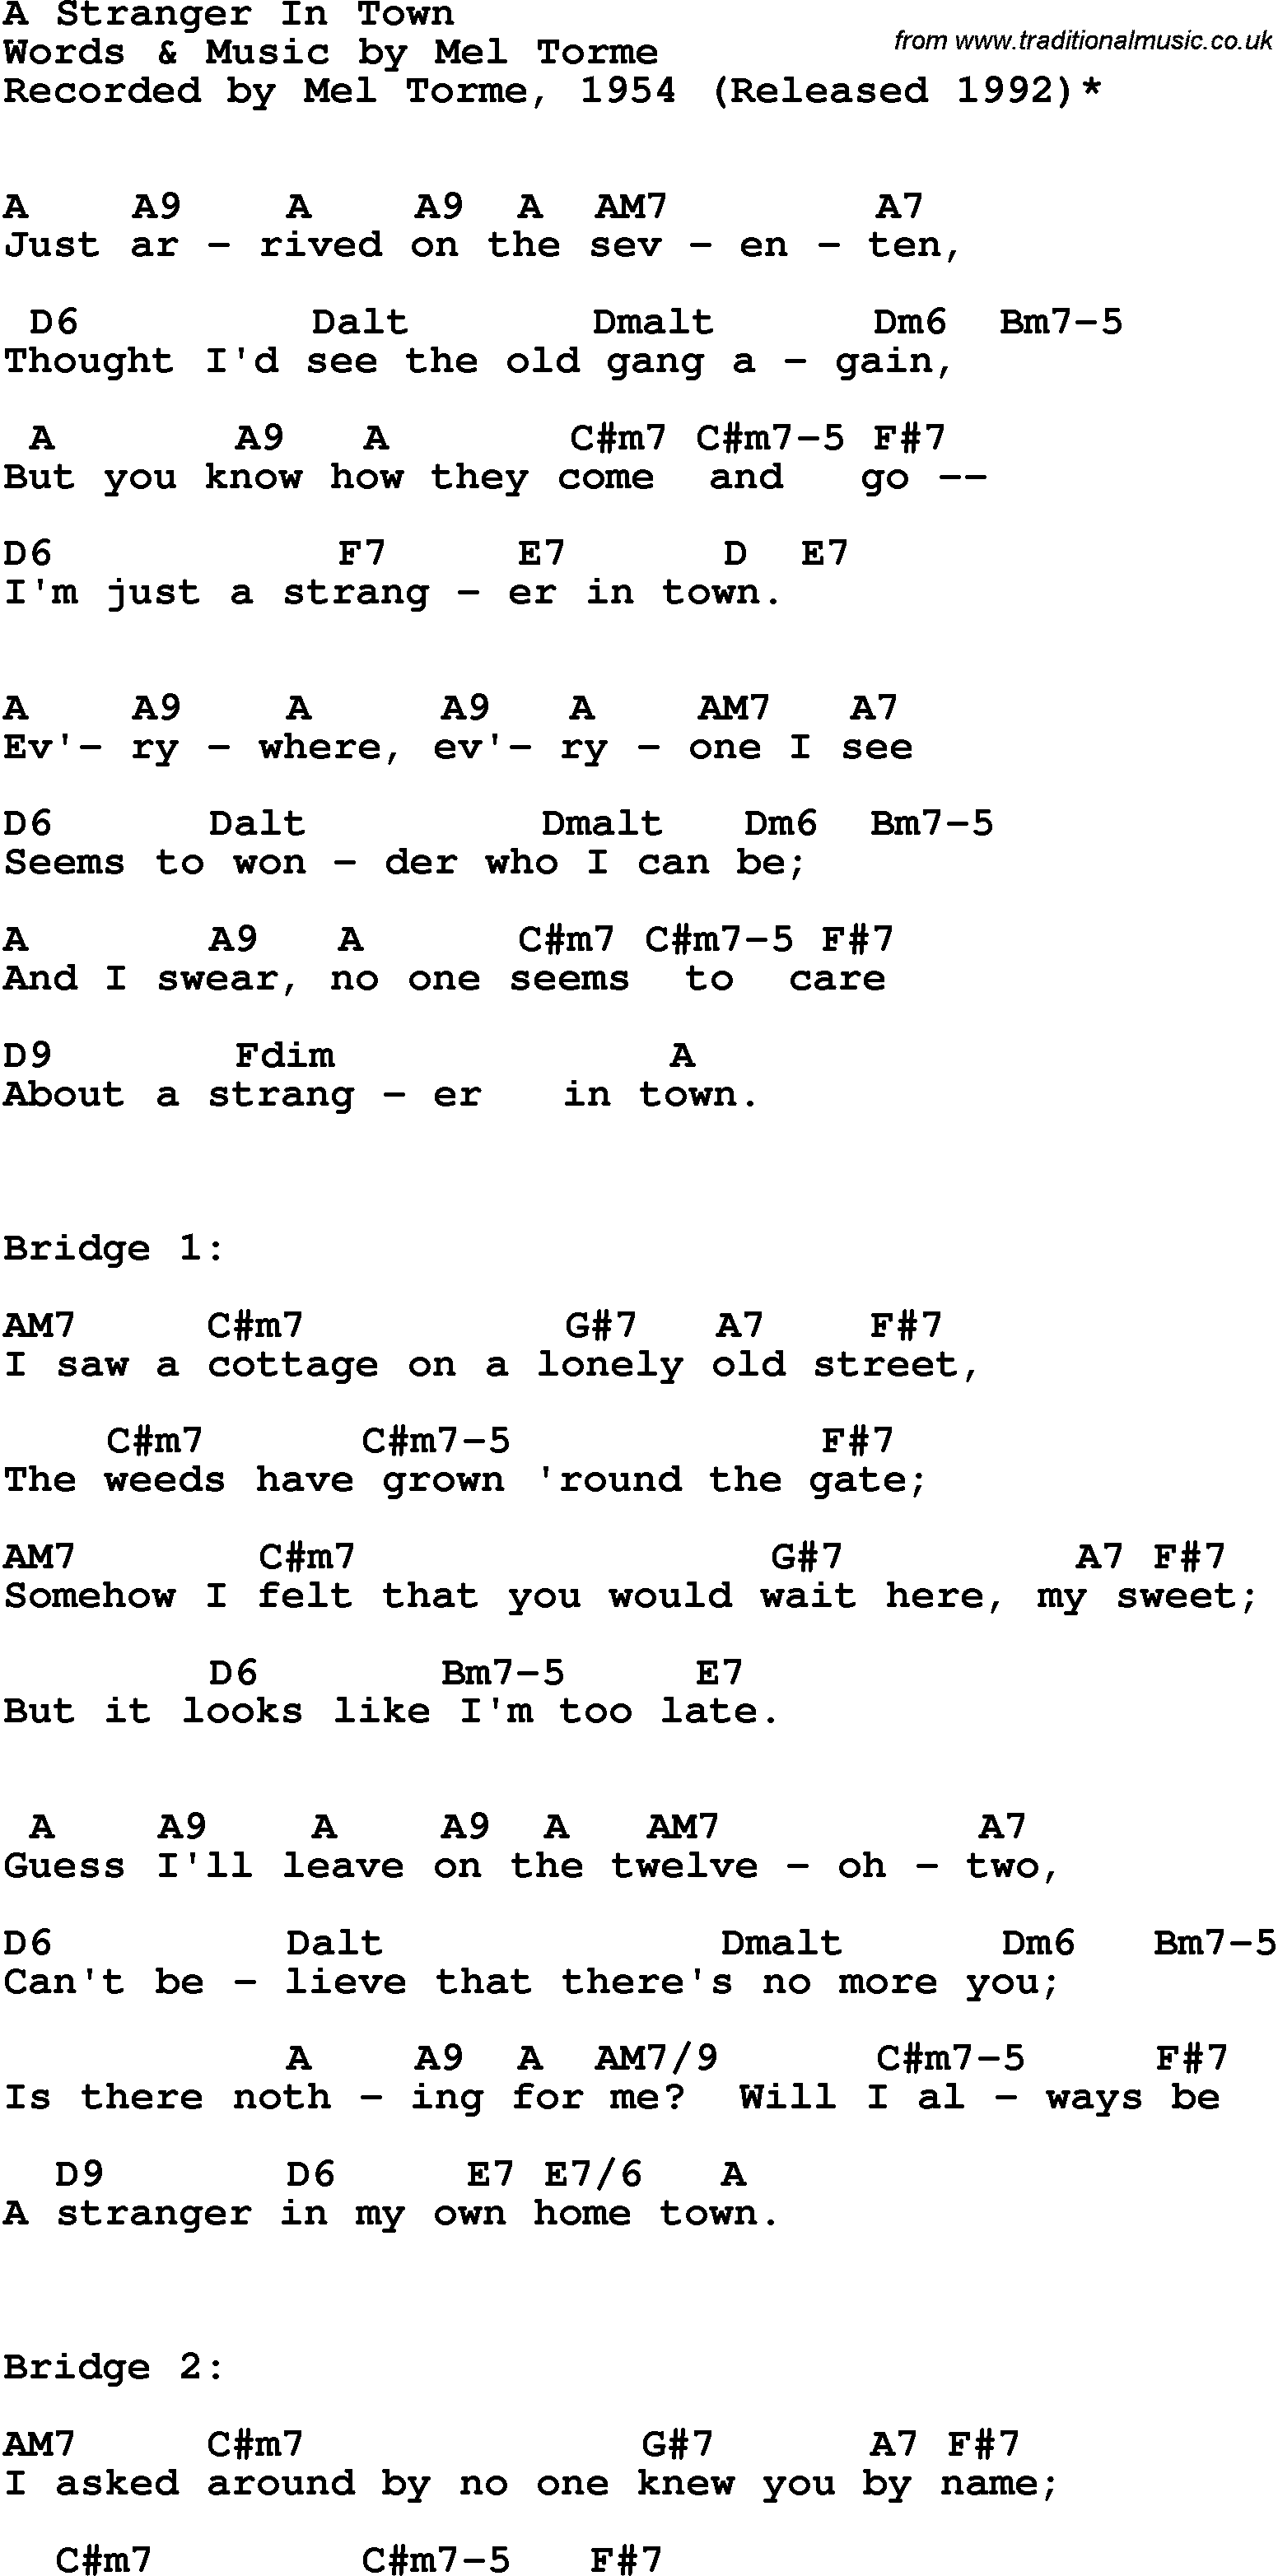 Song Lyrics with guitar chords for A Stranger In Town - Mel Torme, 1954